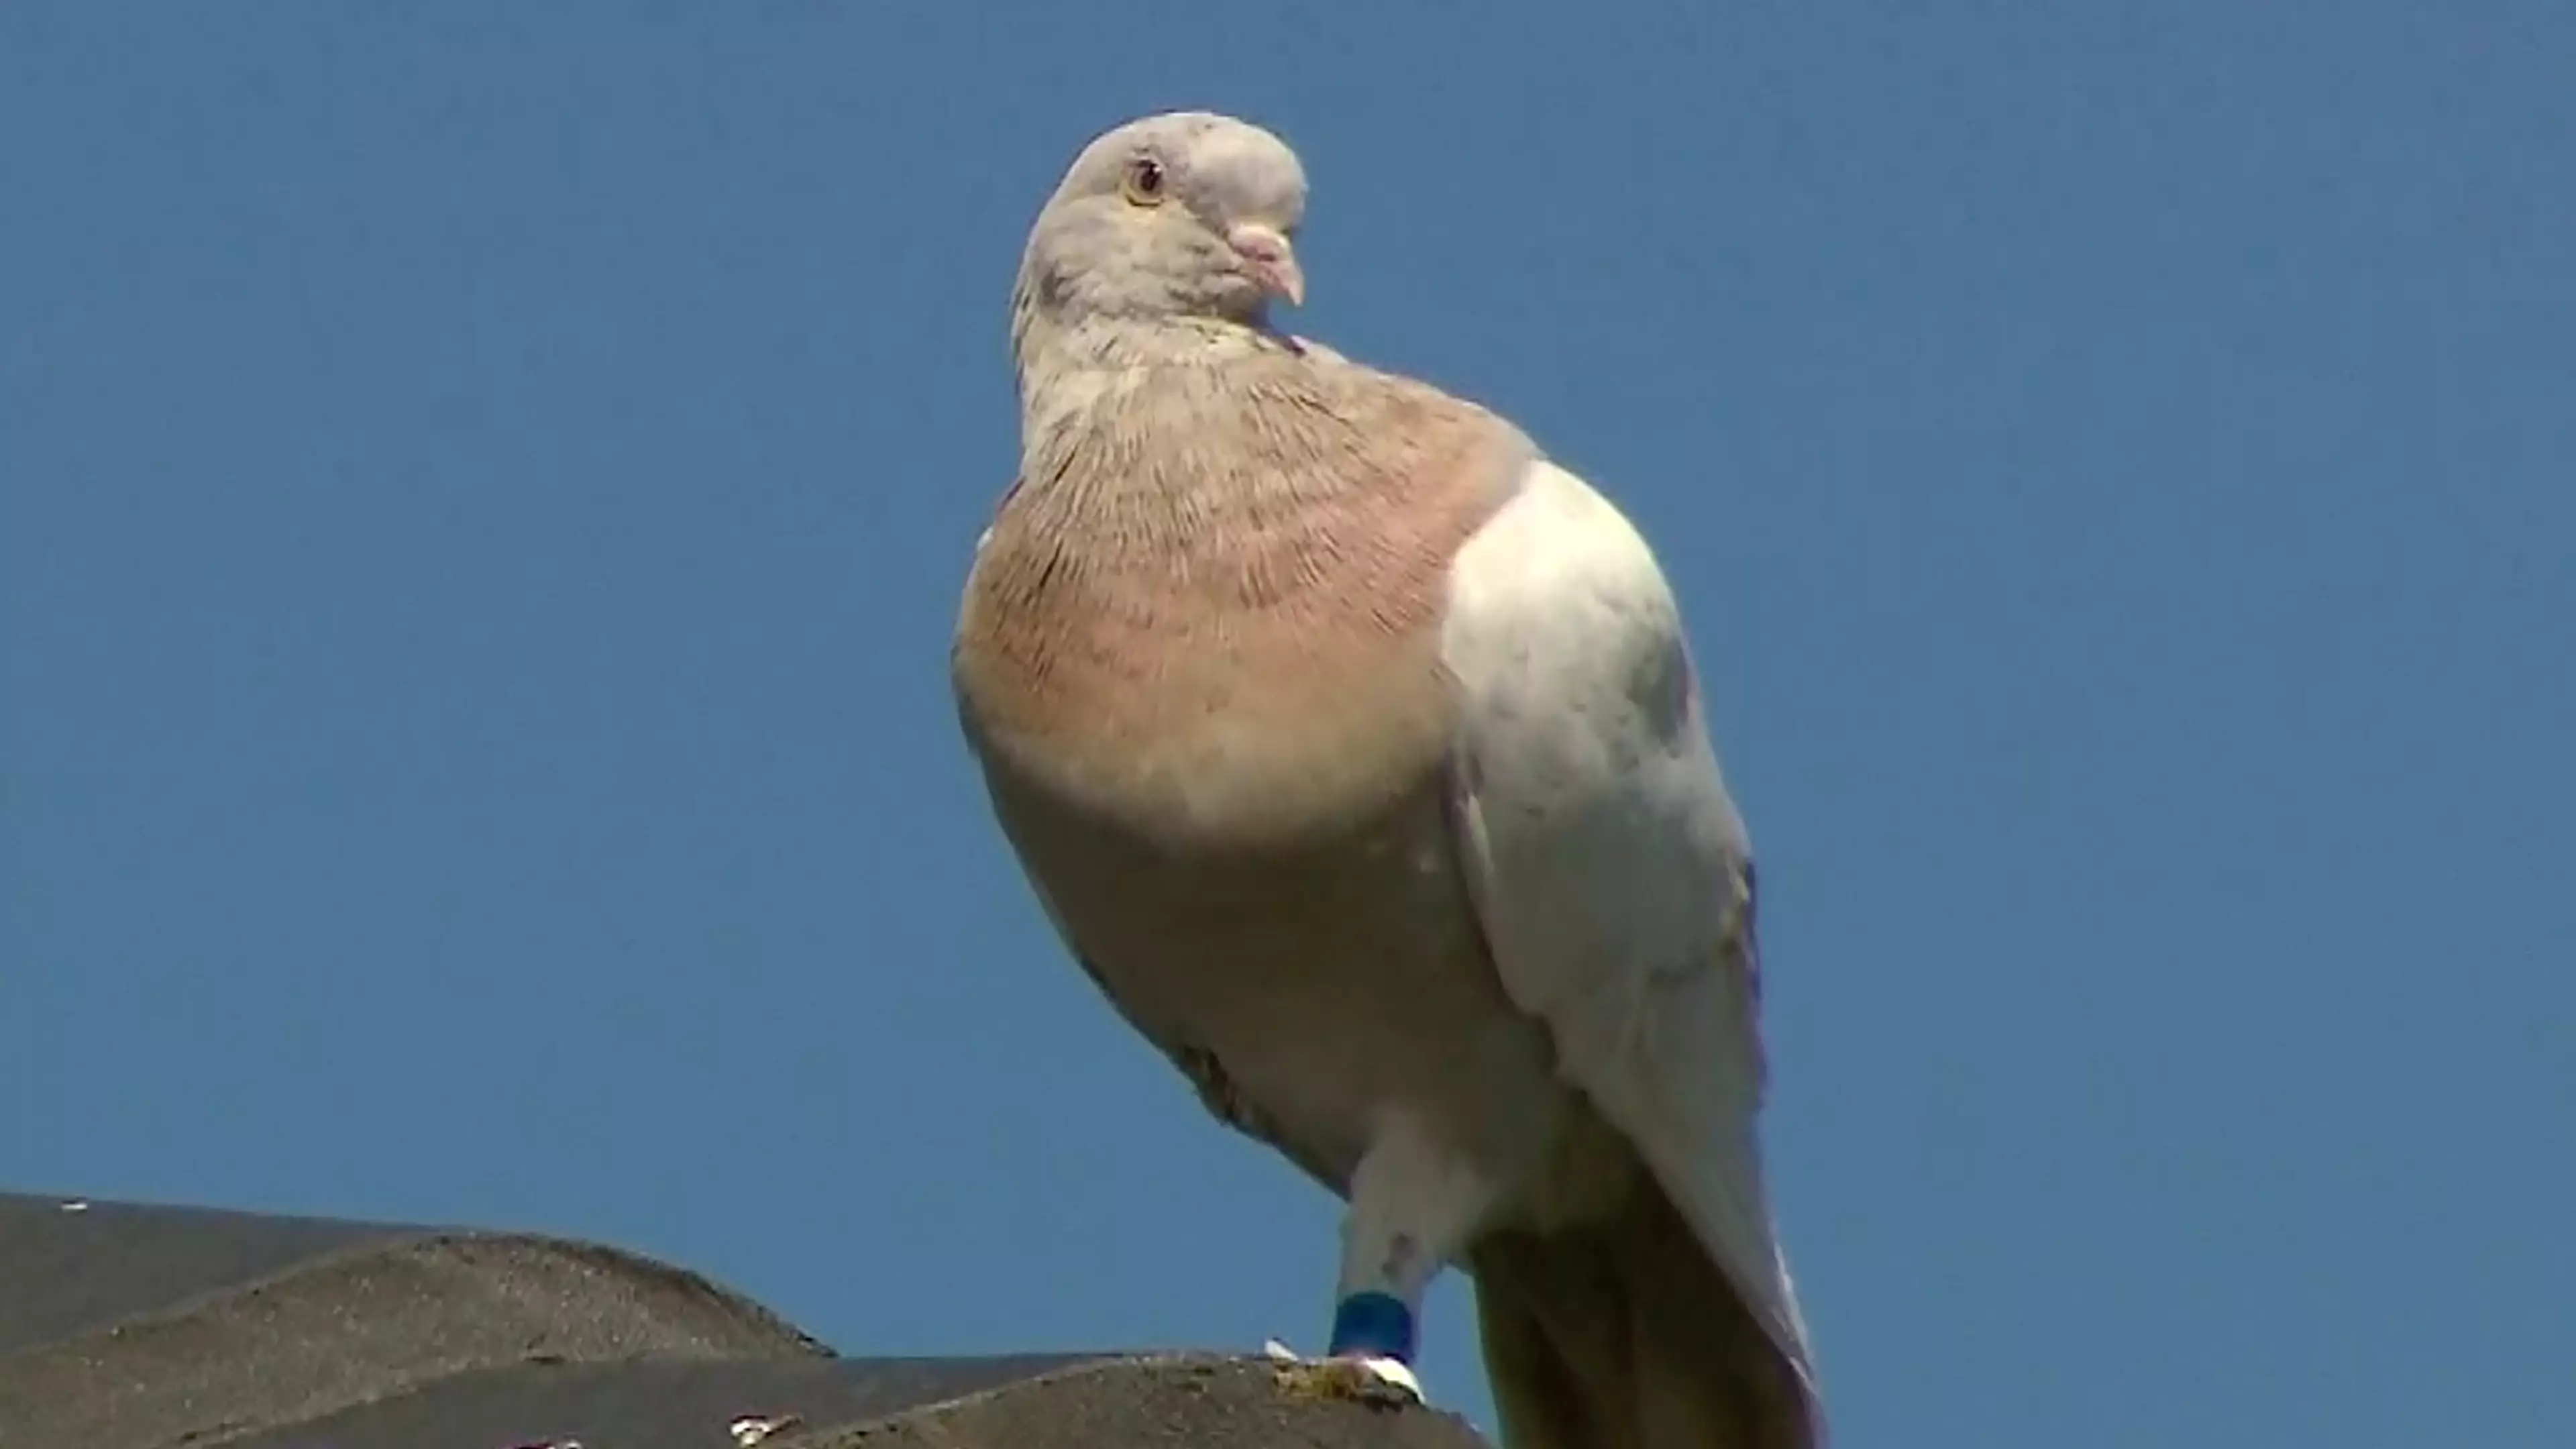 Petition Launched To Save Joe The Racing Pigeon That Flew 13,000kms From US To Australia